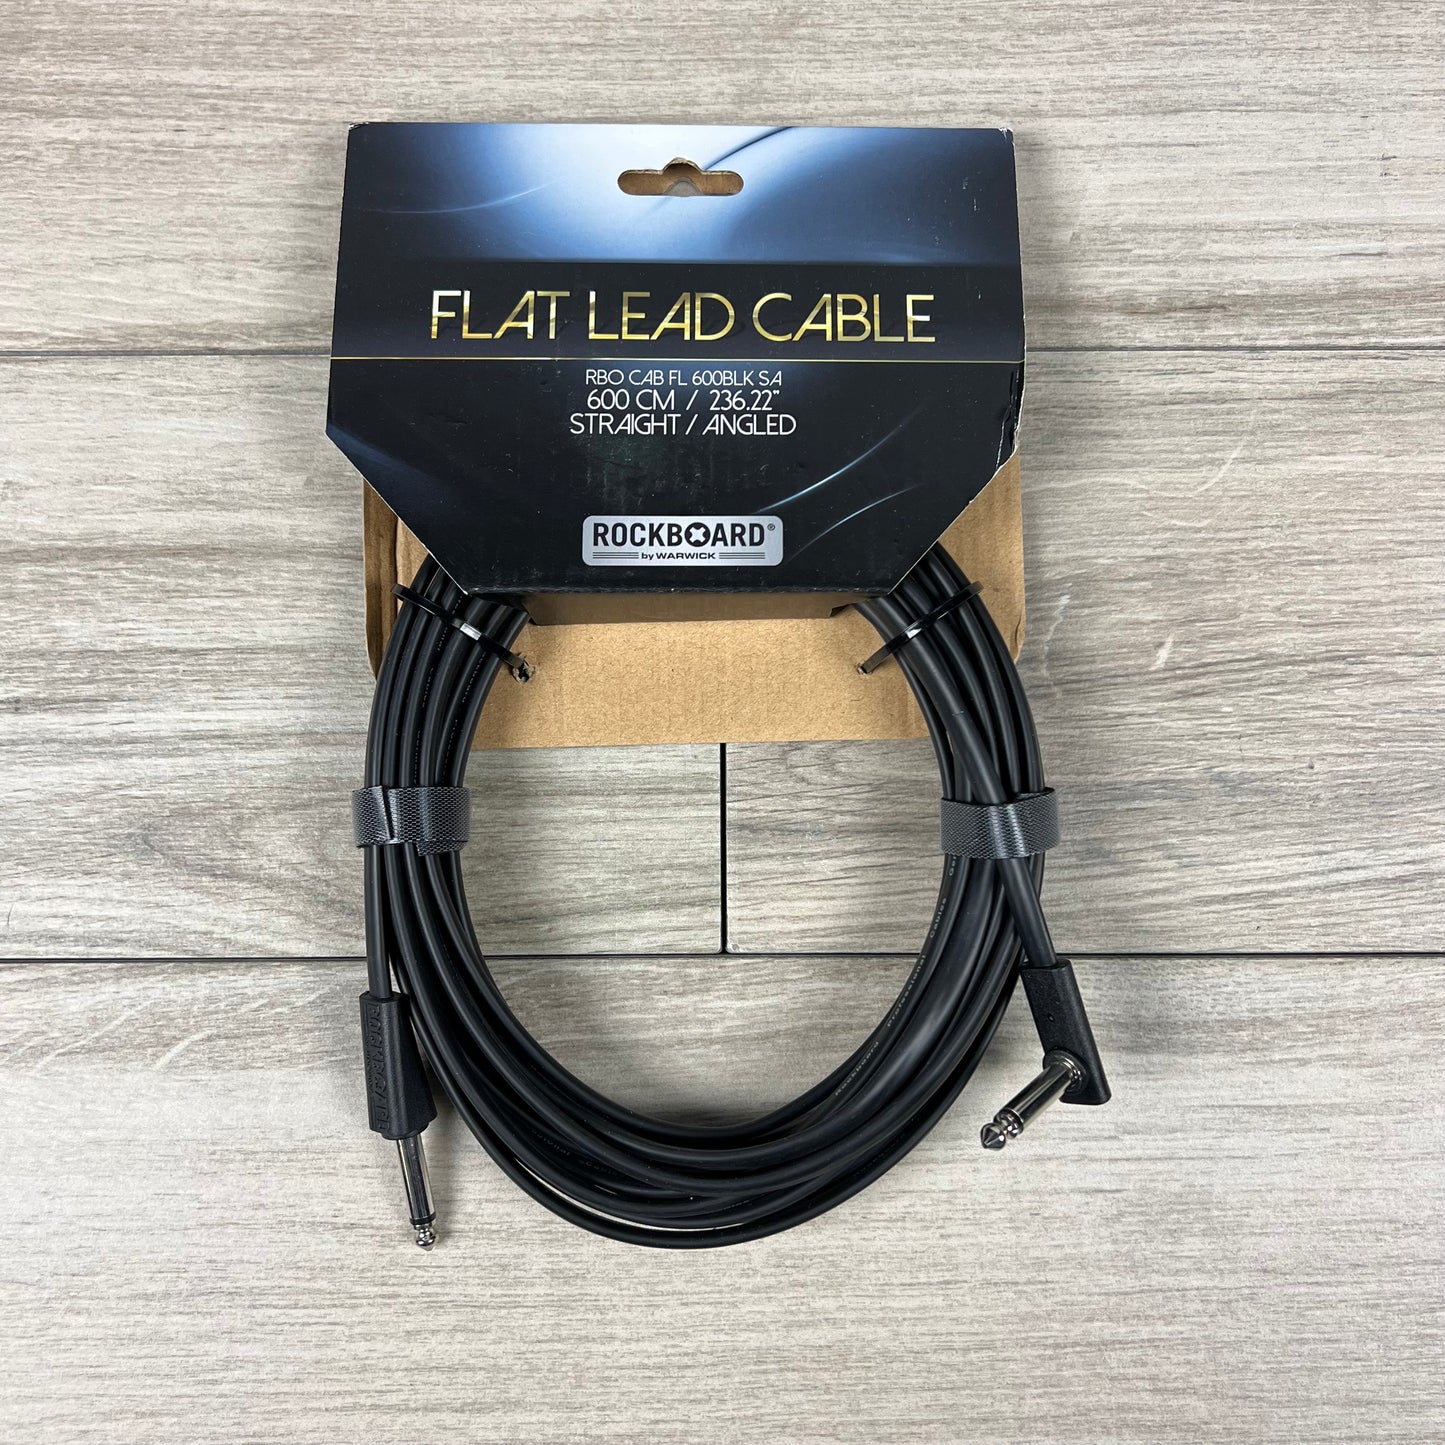 RockBoard Flat Instrument Cable, Straight / Angled, 600 cm / 236-7/32"